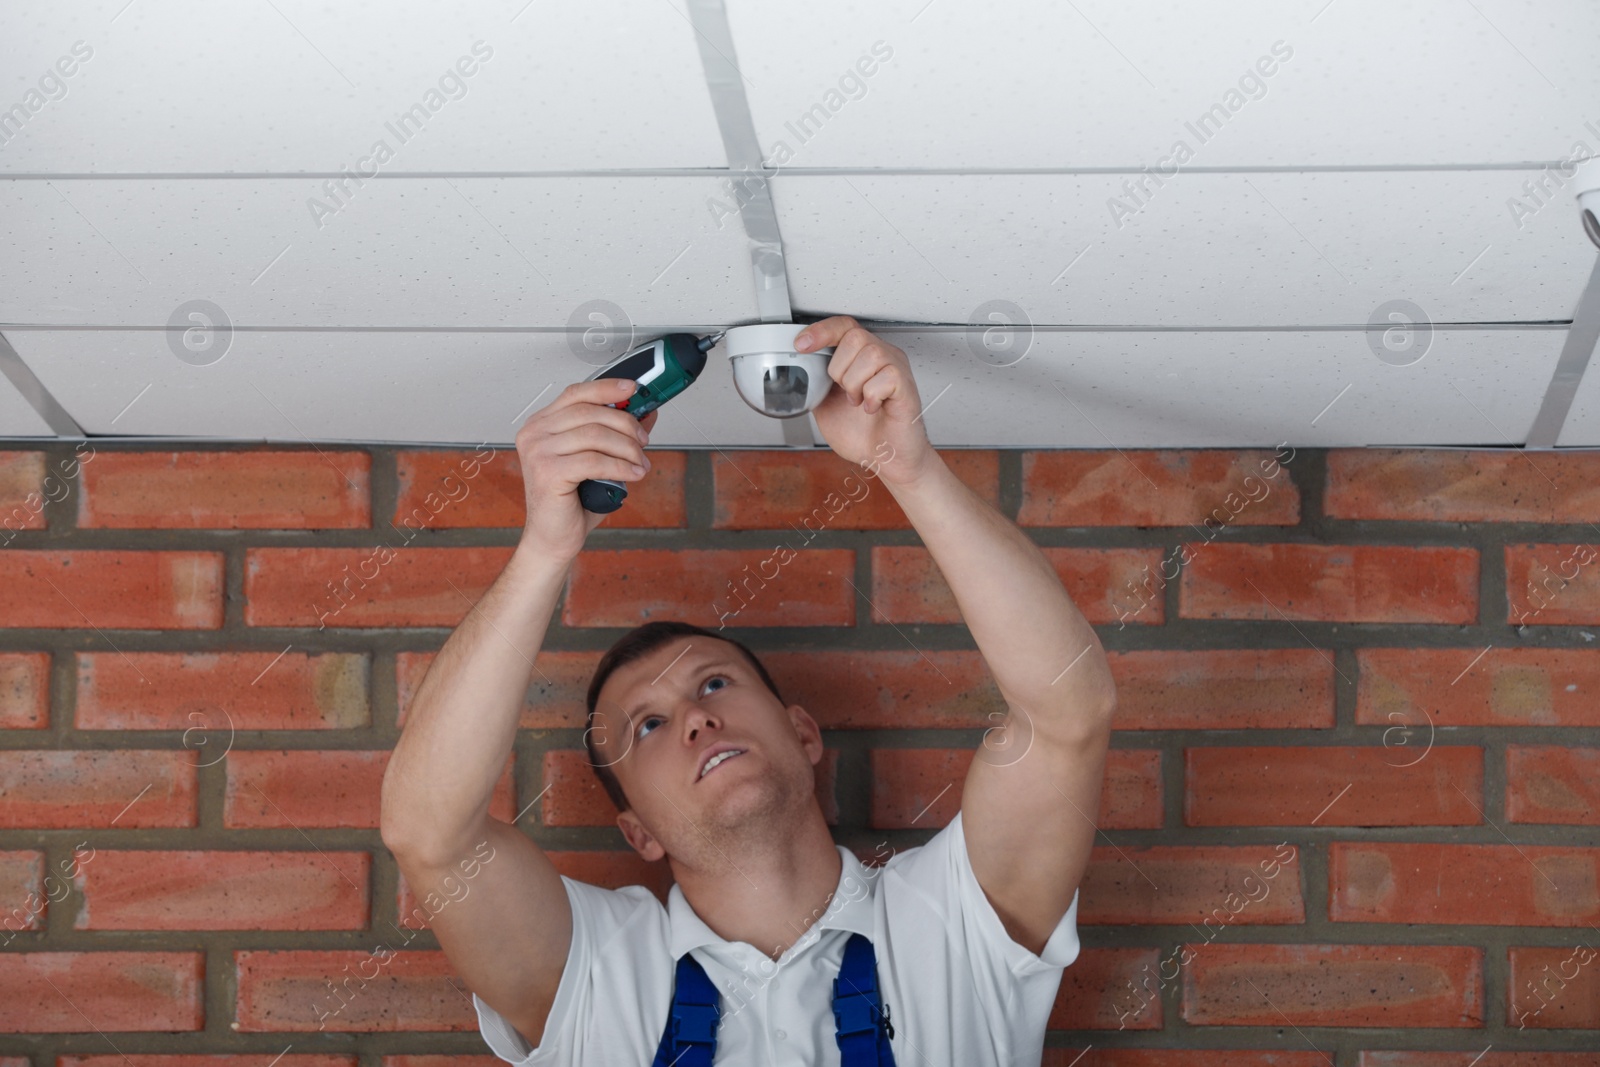 Photo of Technician installing CCTV camera on ceiling indoors